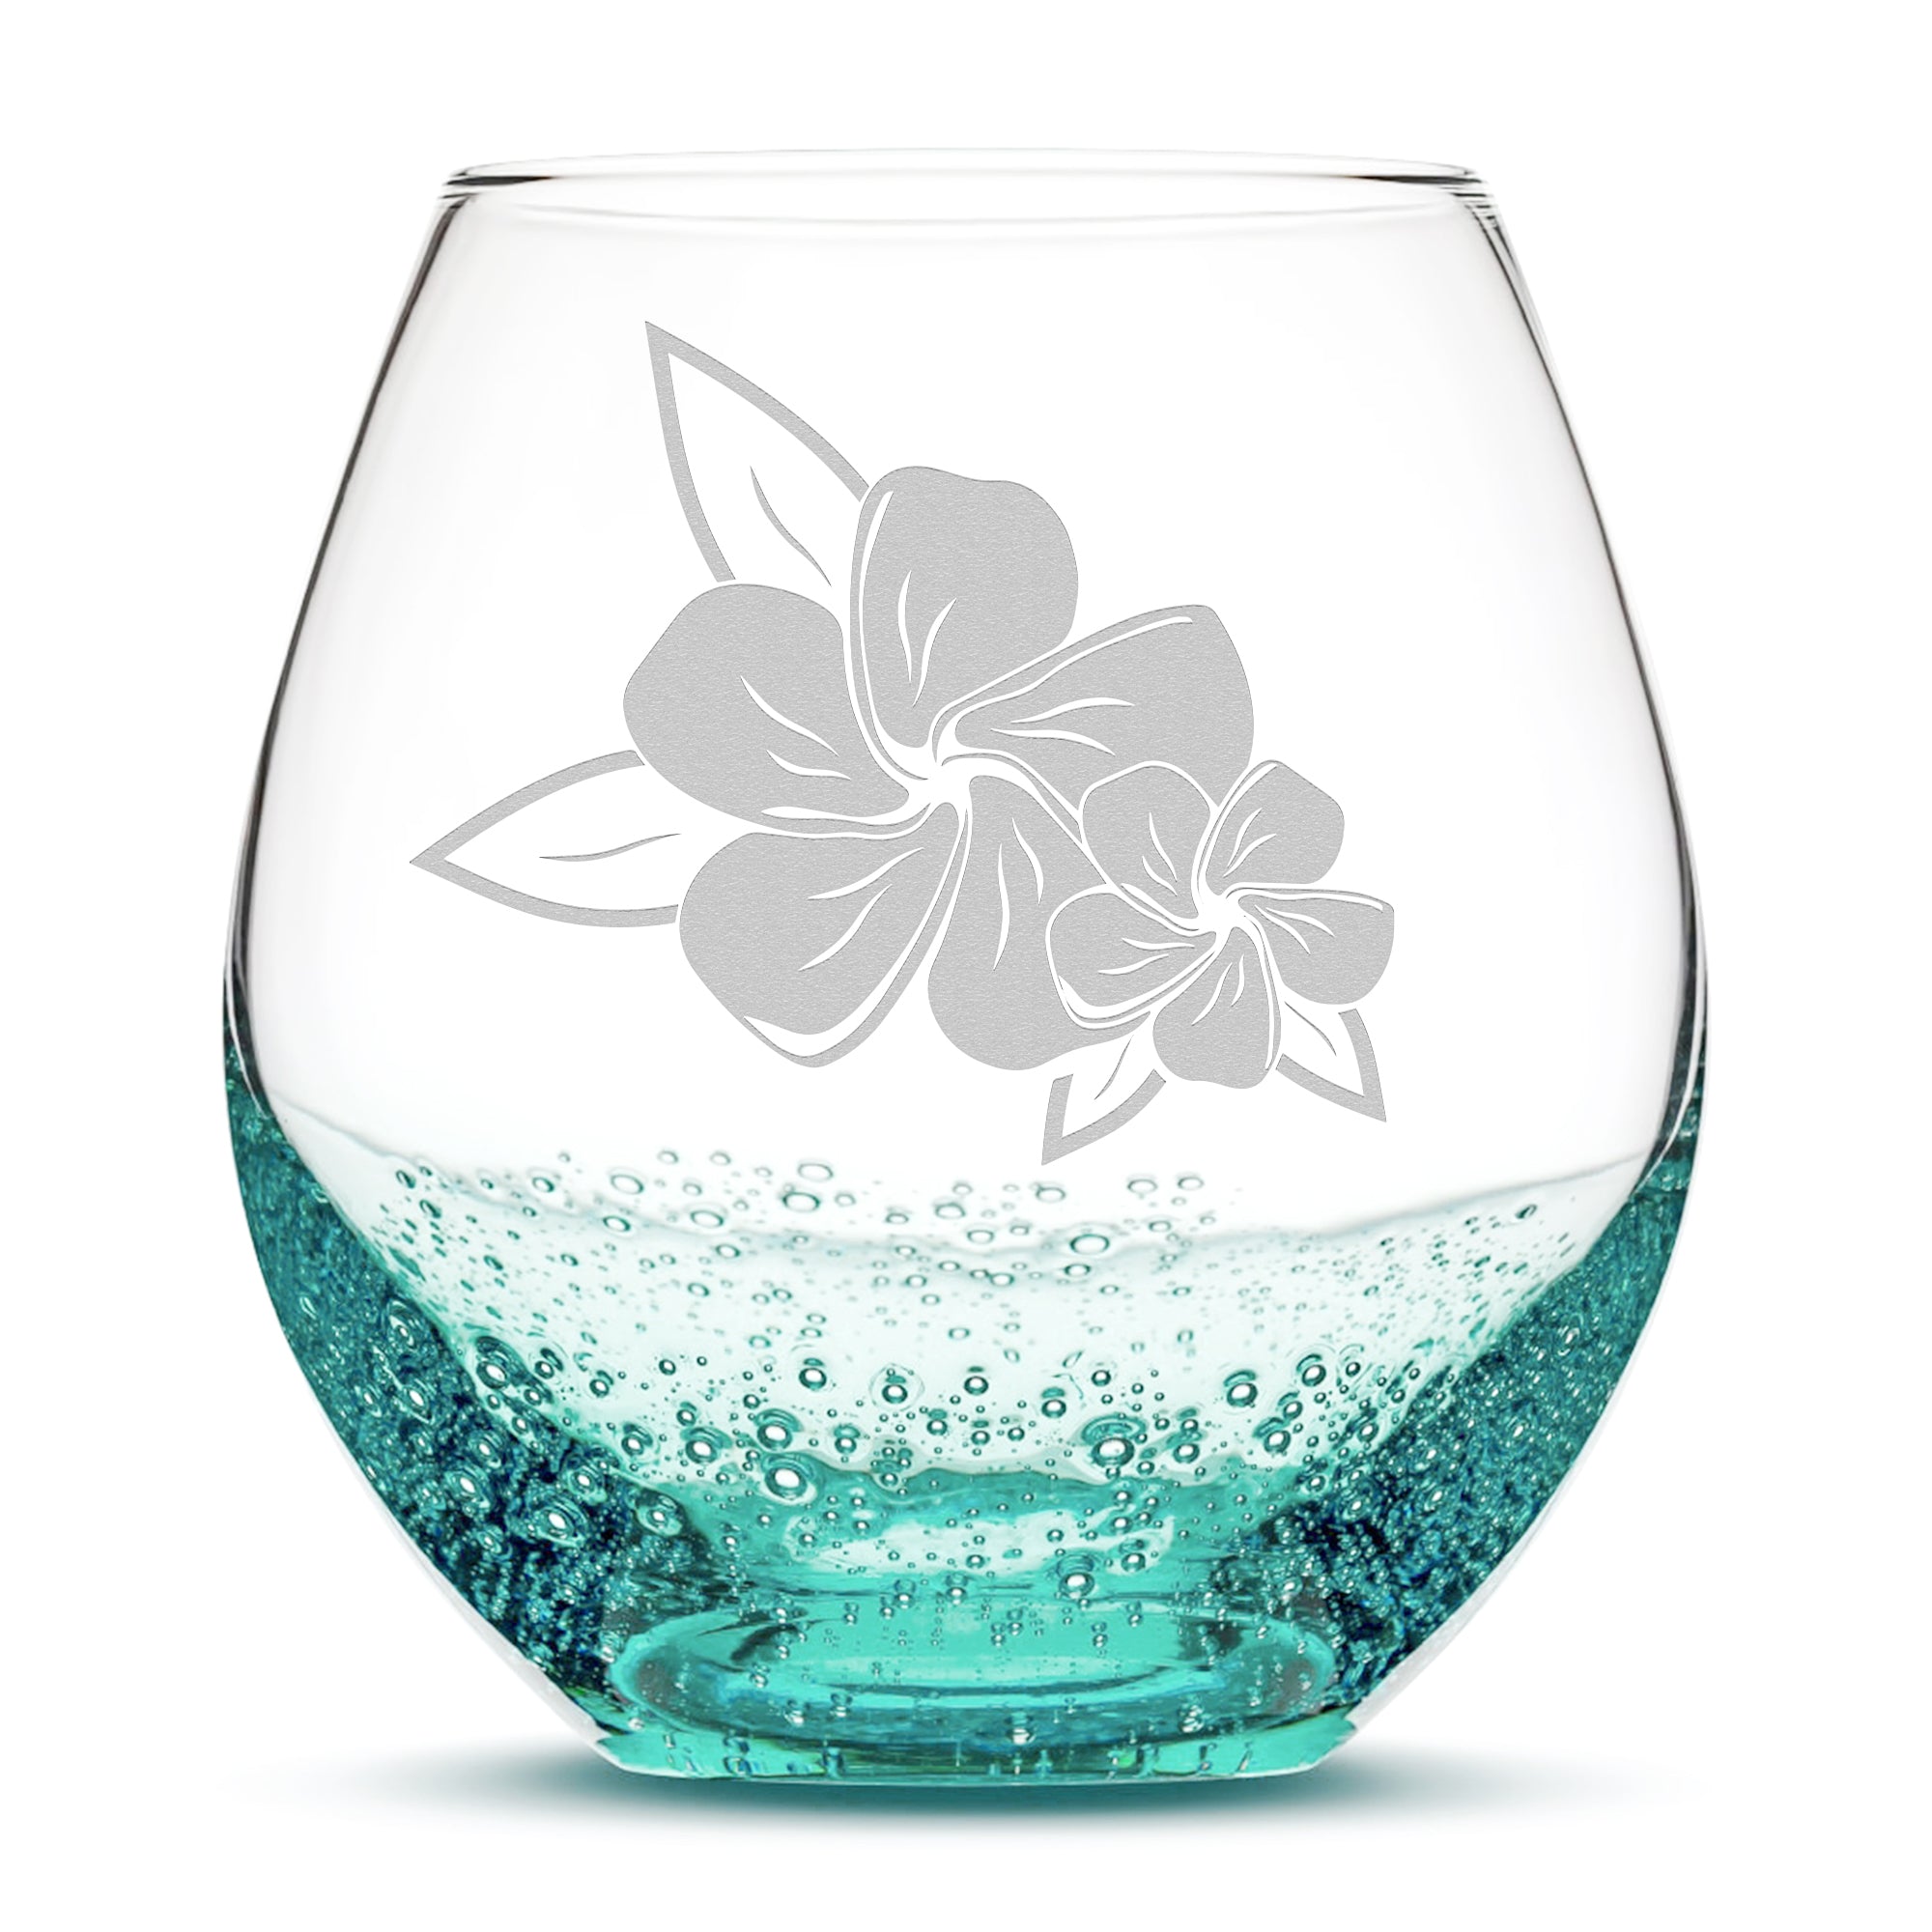 Bubble Wine Glass, 2 Plumerias with Leaves, Hand Etched, 18oz